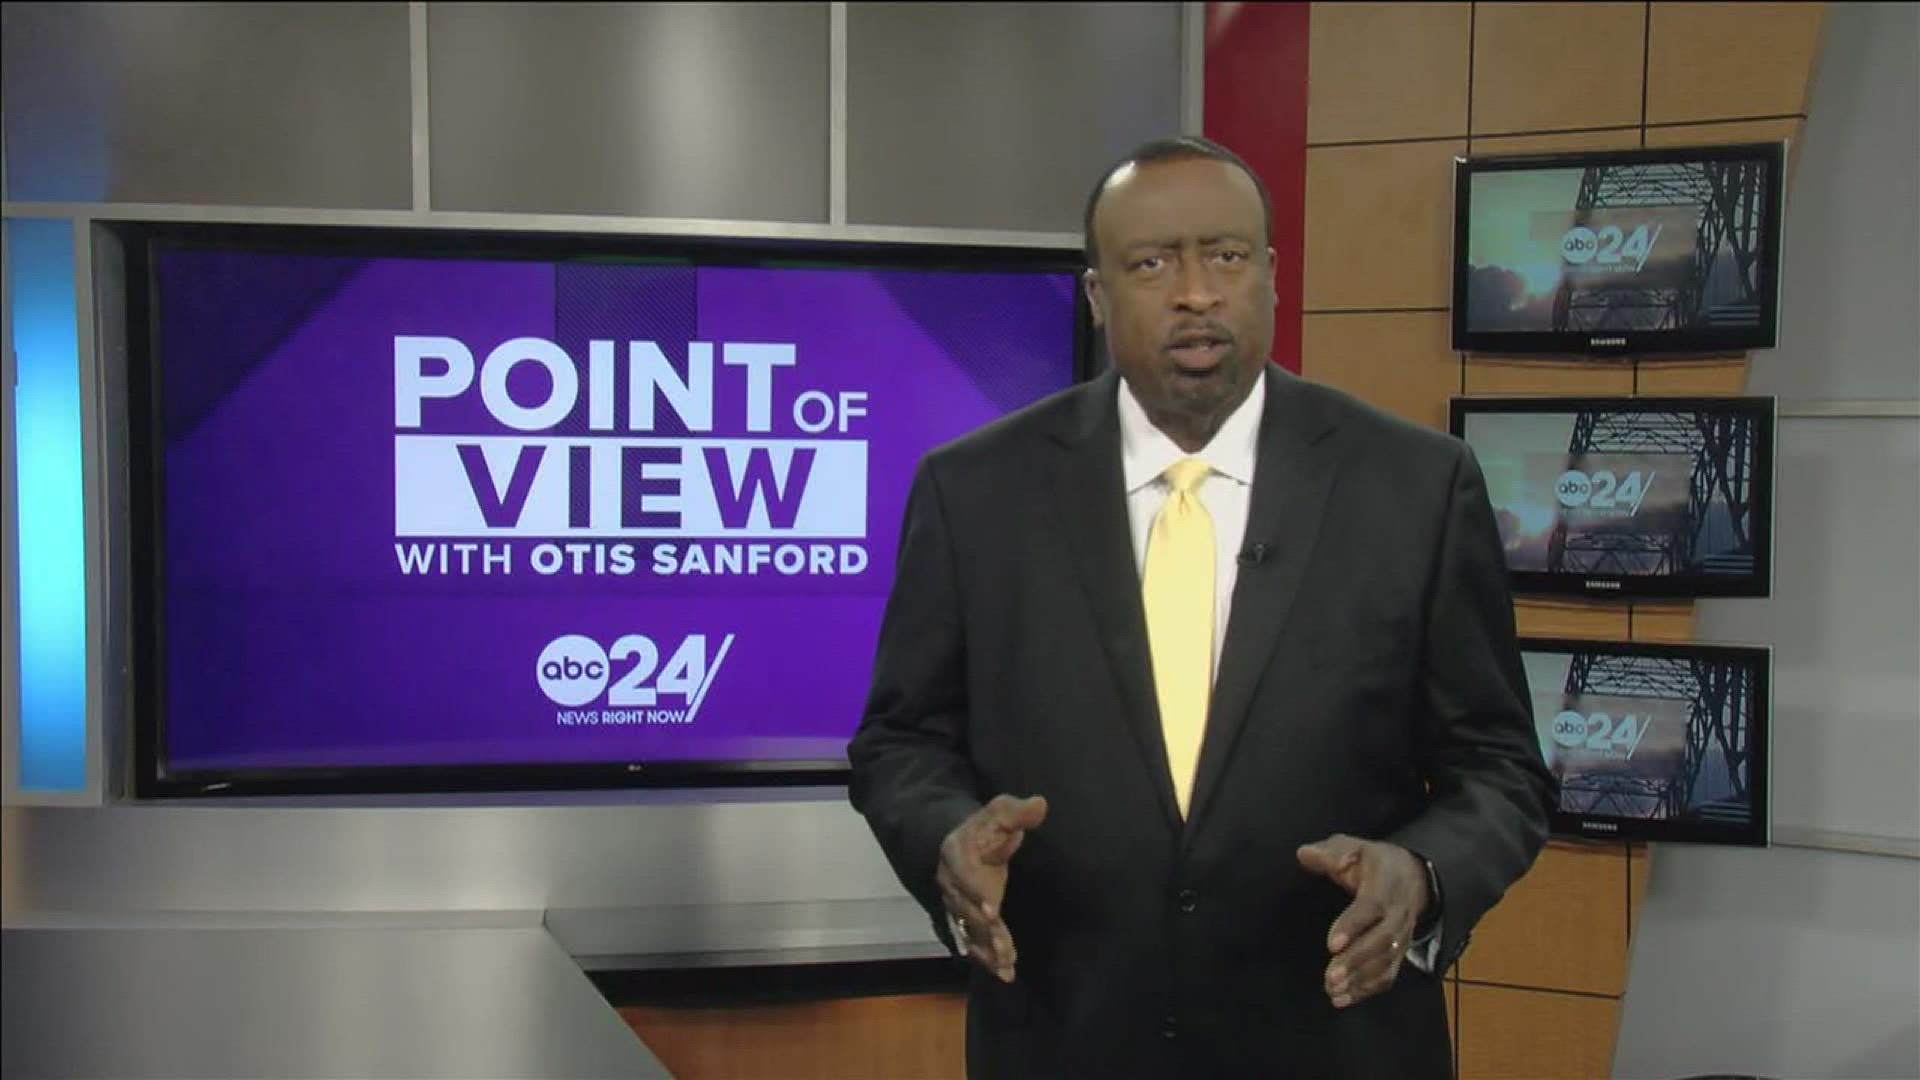 ABC 24 political analyst and commentator Otis Sanford shared his point of view on residency requirements for Memphis police and firefighters.